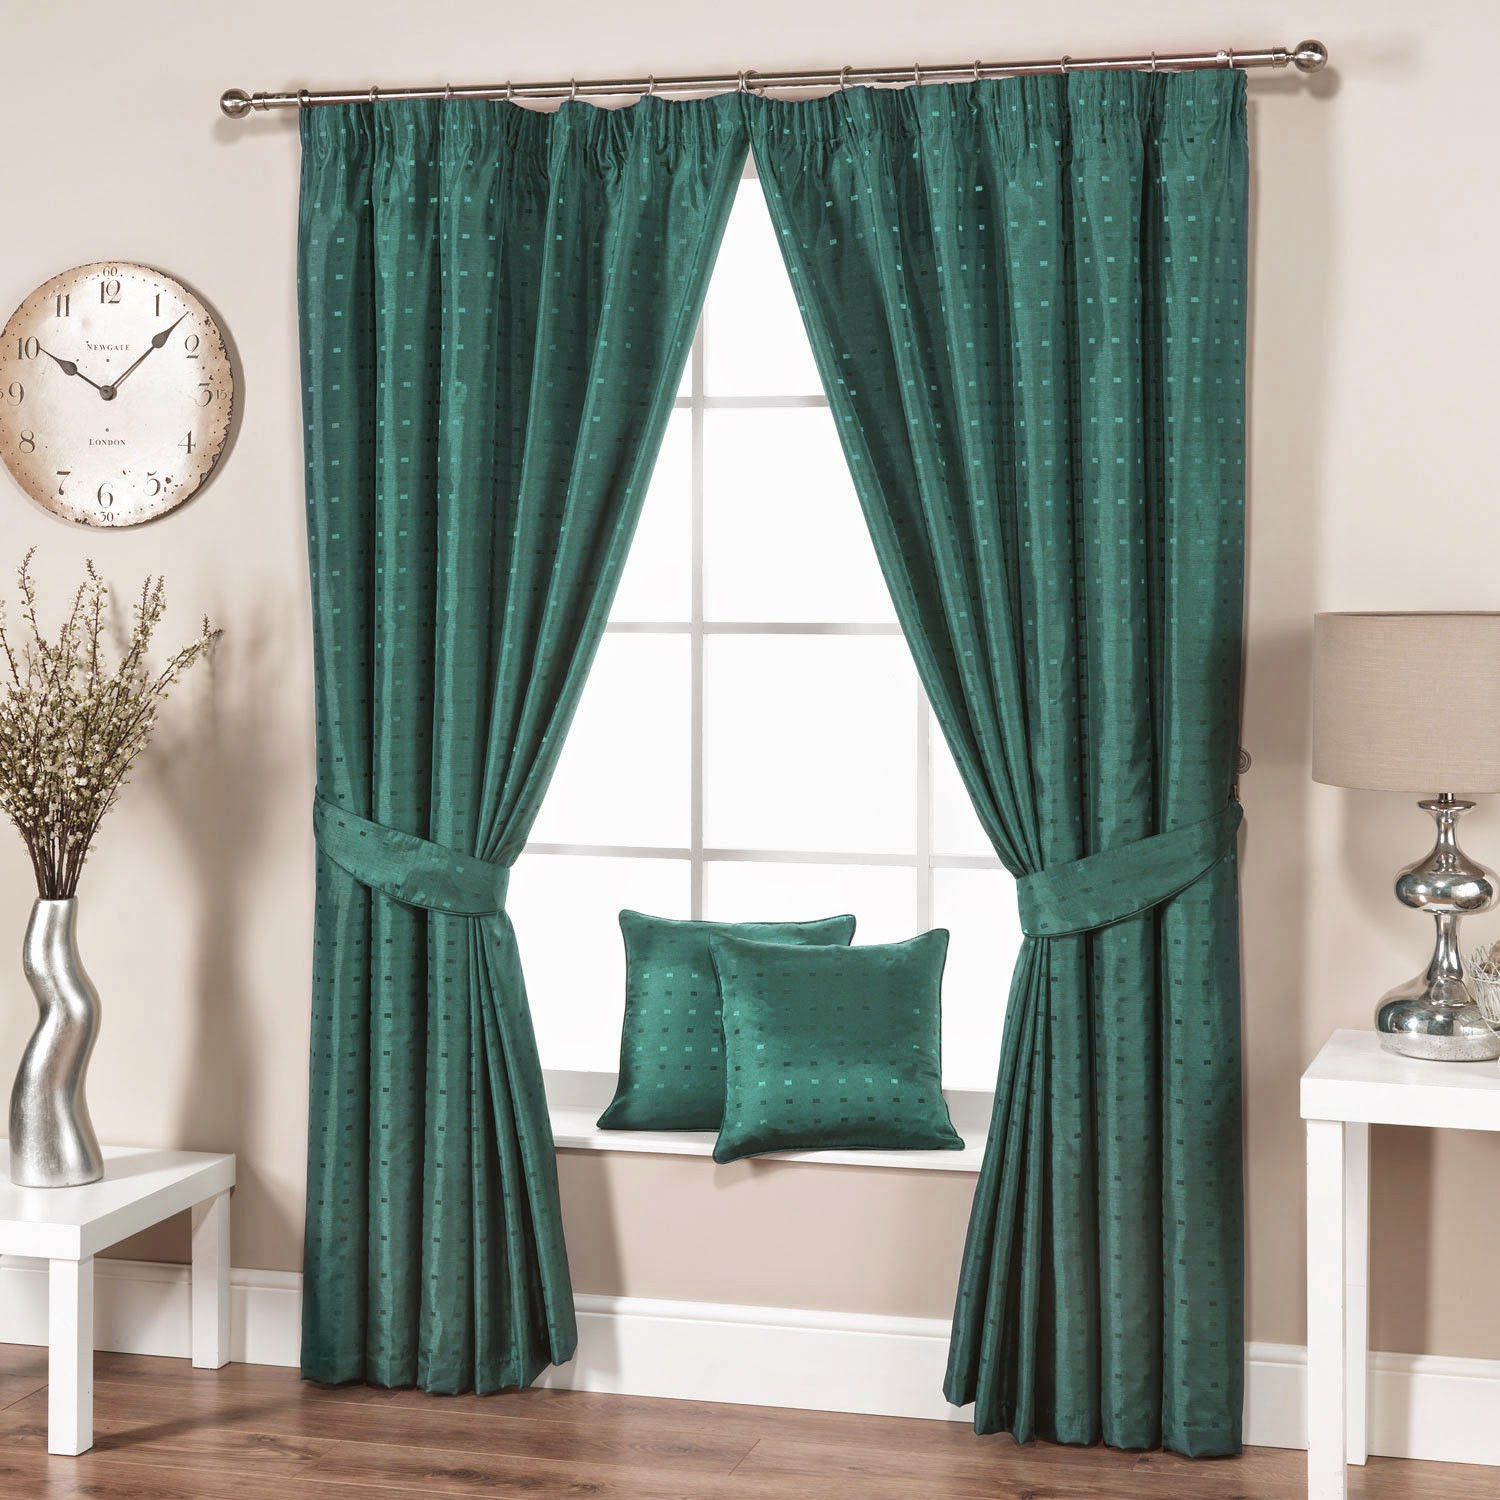 Turquoise Curtains Living Room
 Green living room curtains for modern interior